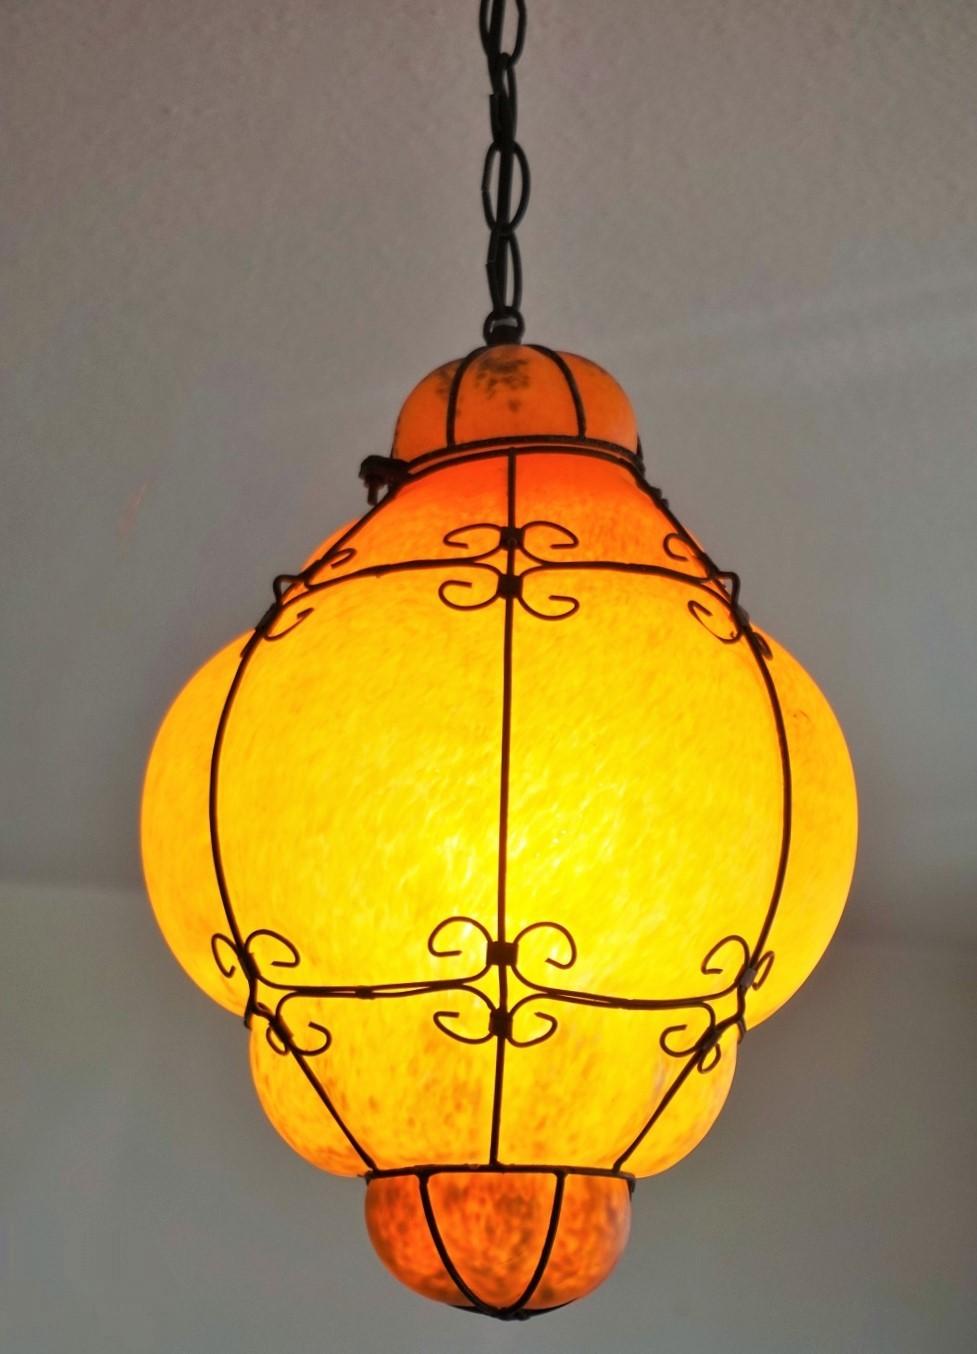 Metal Murano Handcrafted Colored Glass Wrought Iron Pendant or Lantern, Venice, Italy For Sale